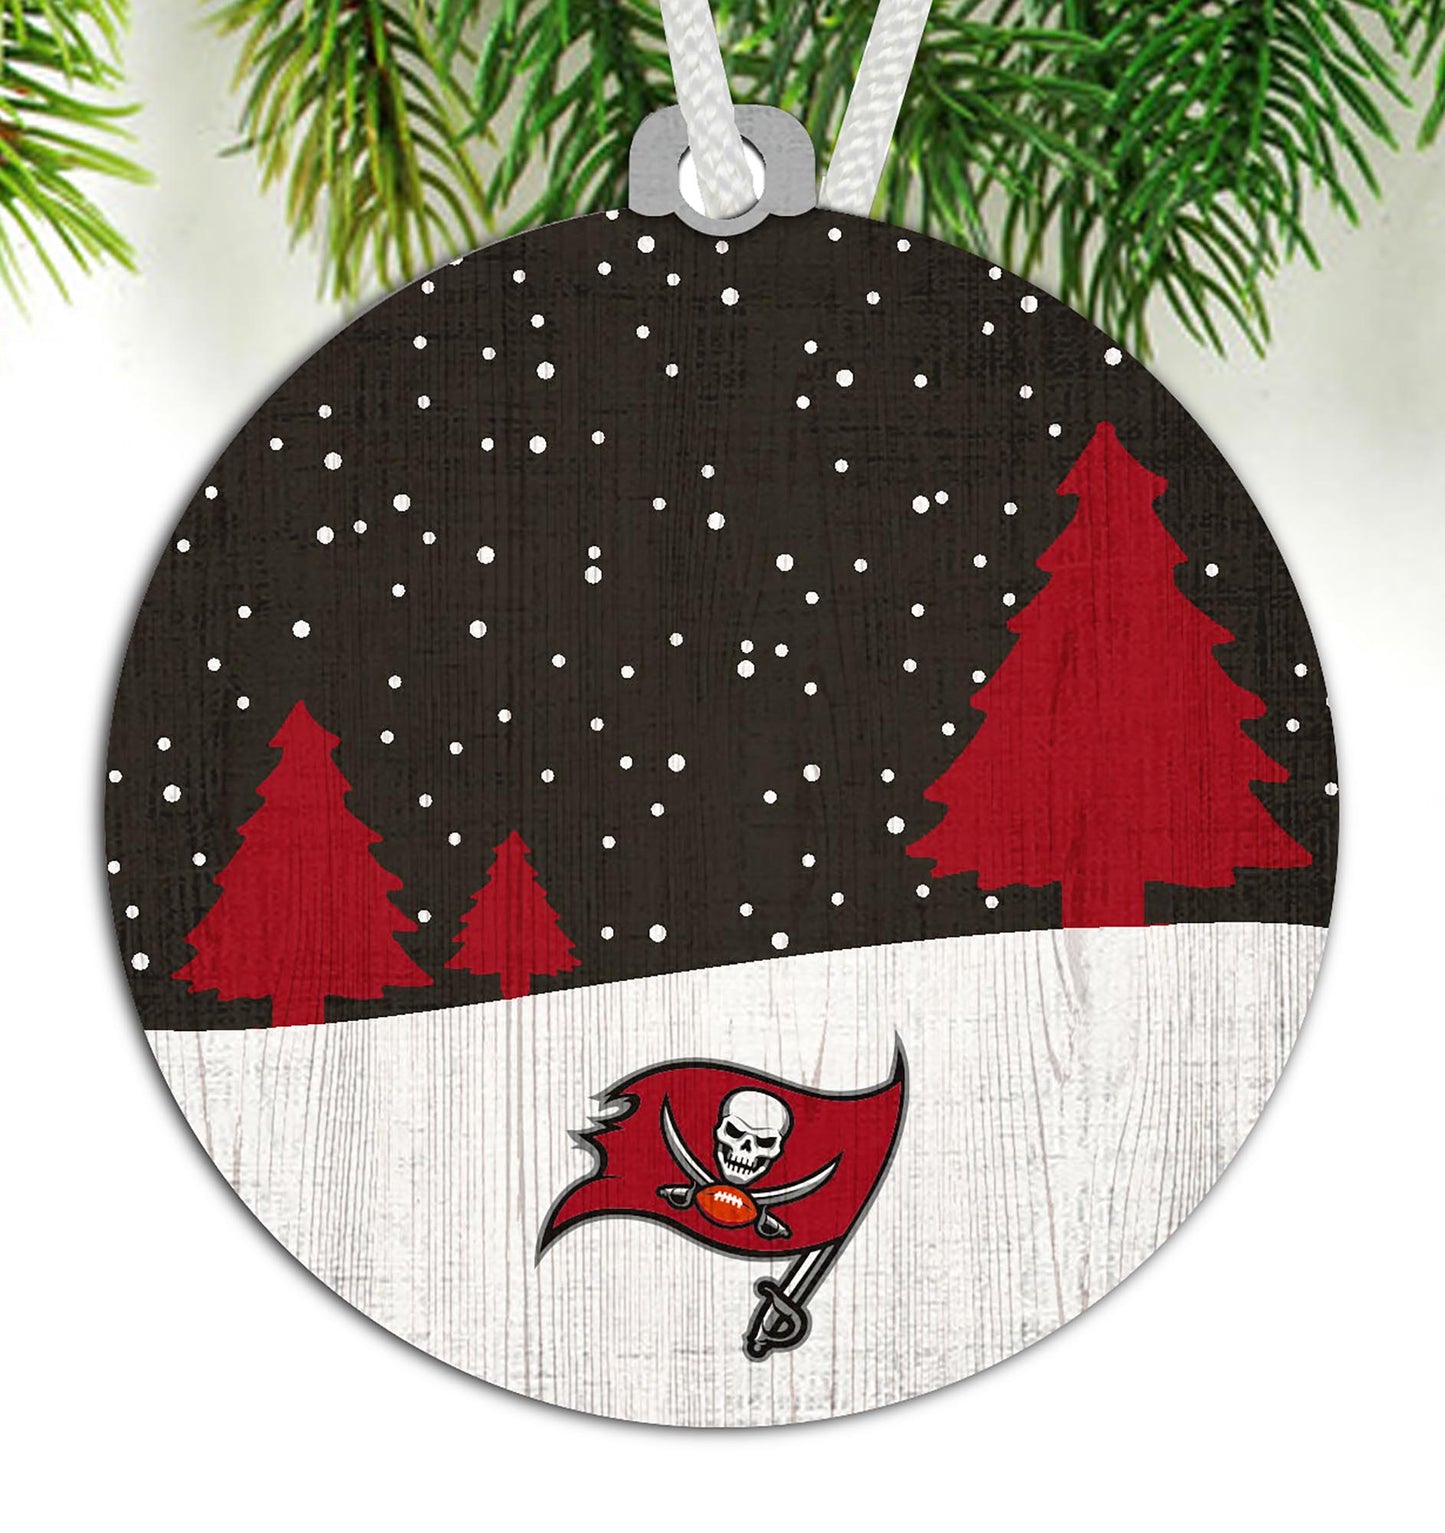 Tampa Bay Buccaneers Snow Scene Ornament by Fan Creations